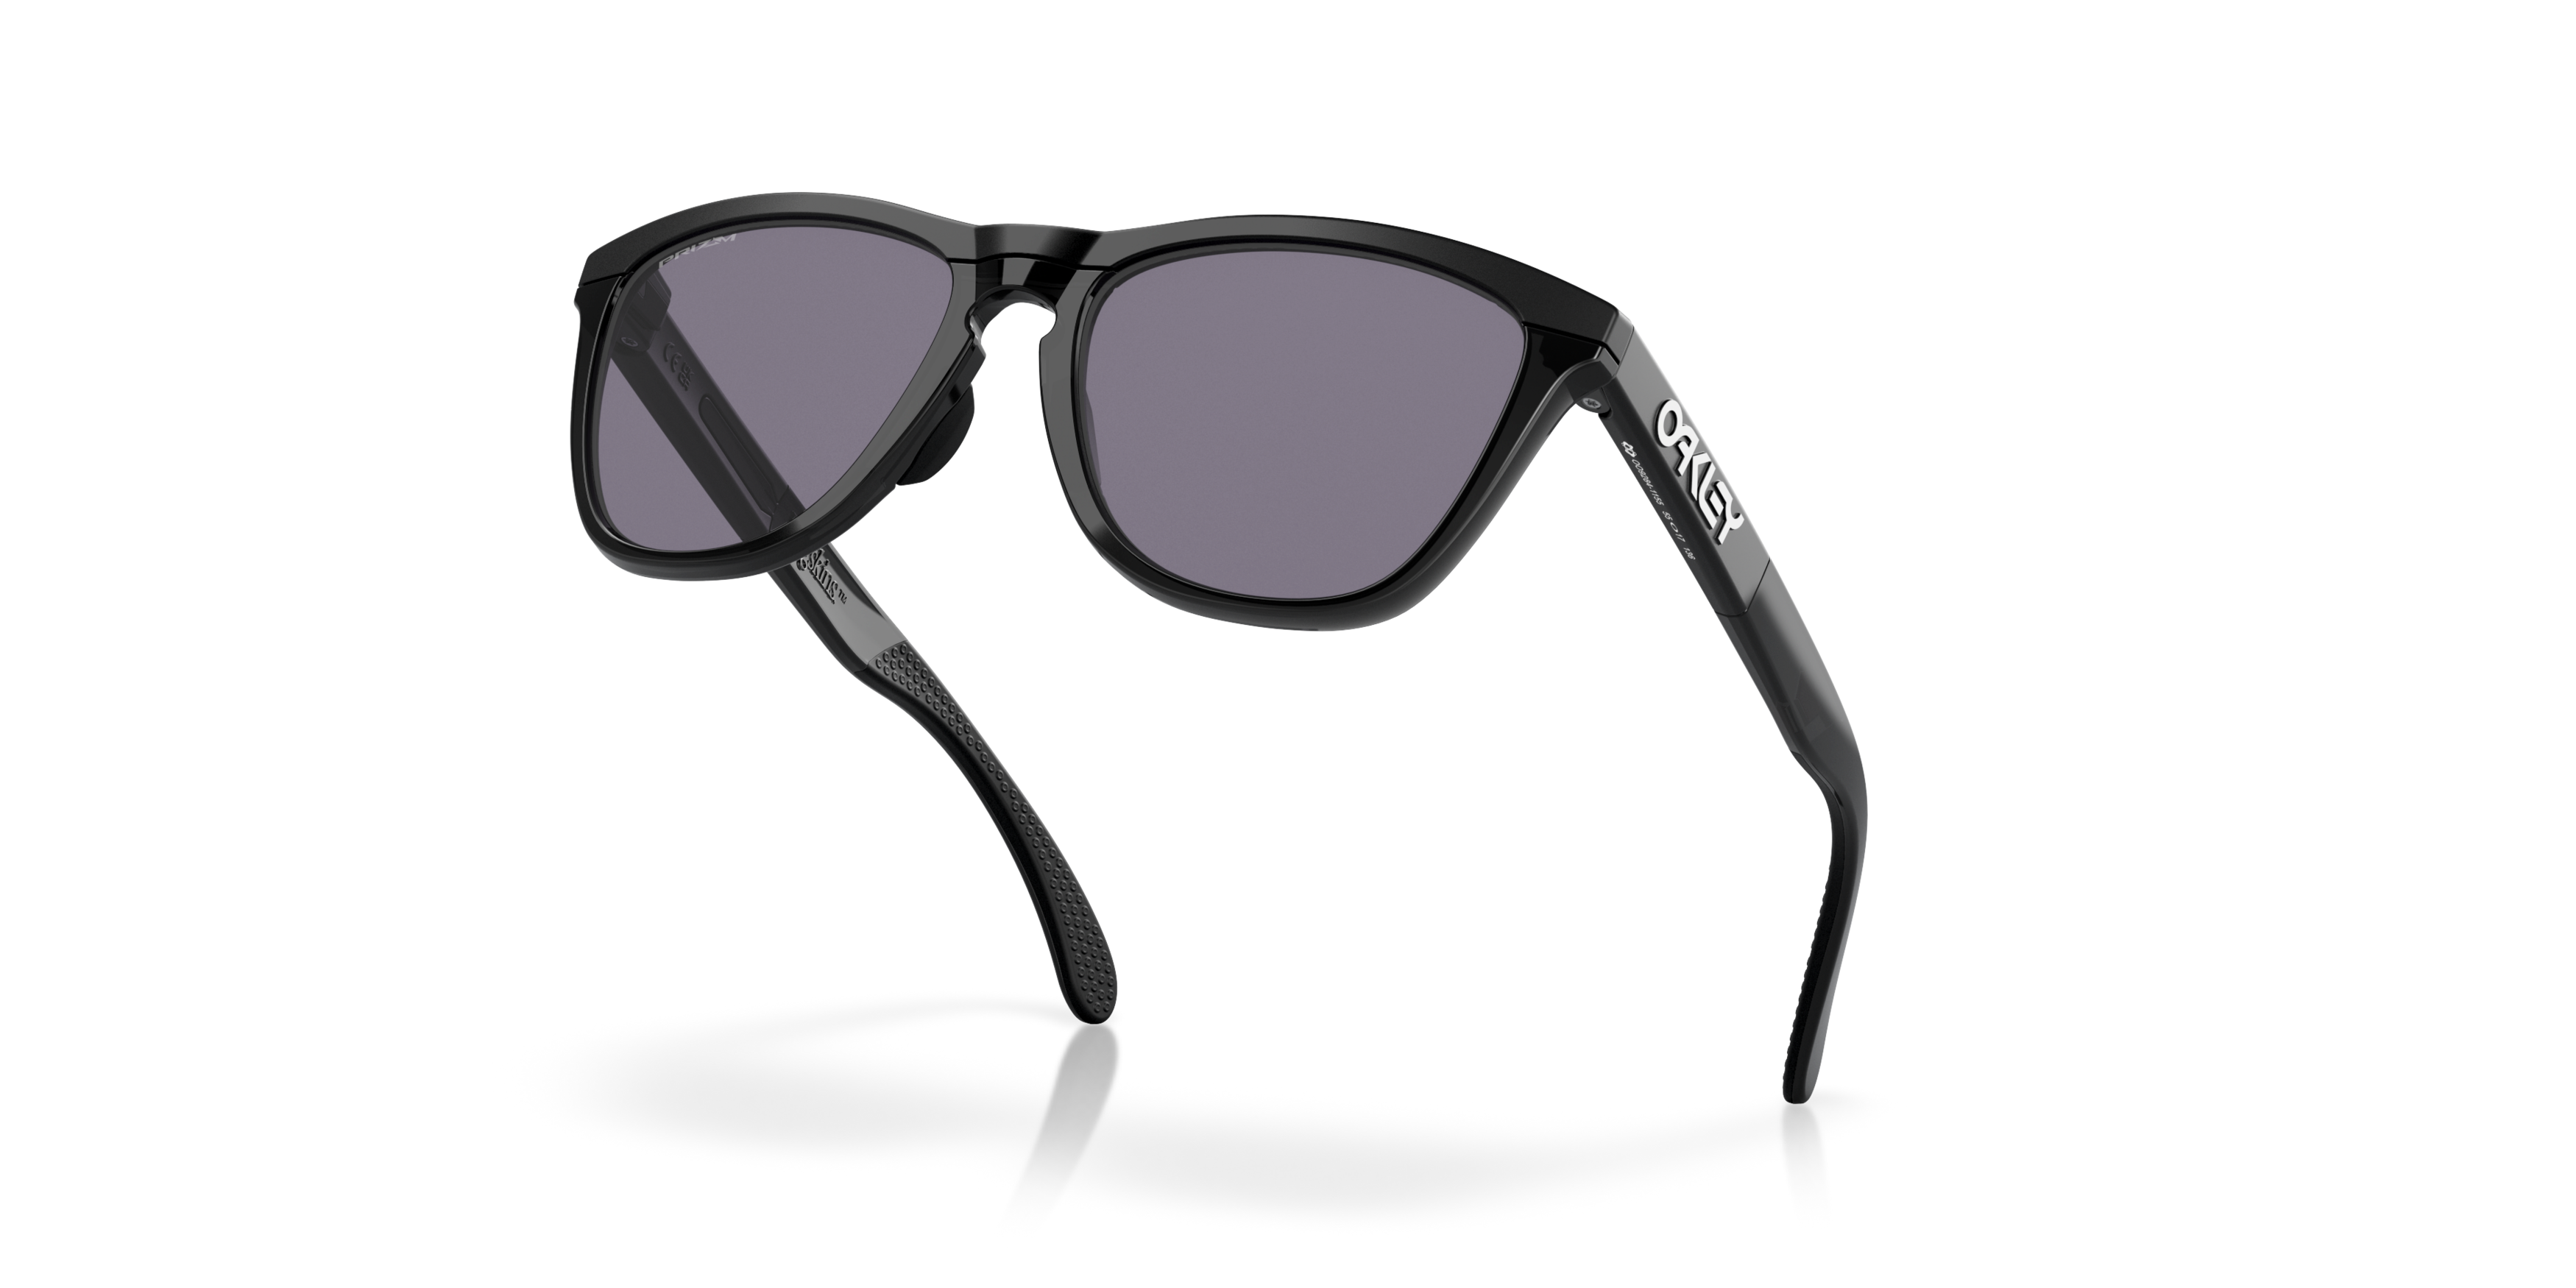 [products.image.bottom_up] OAKLEY OO9284 928411